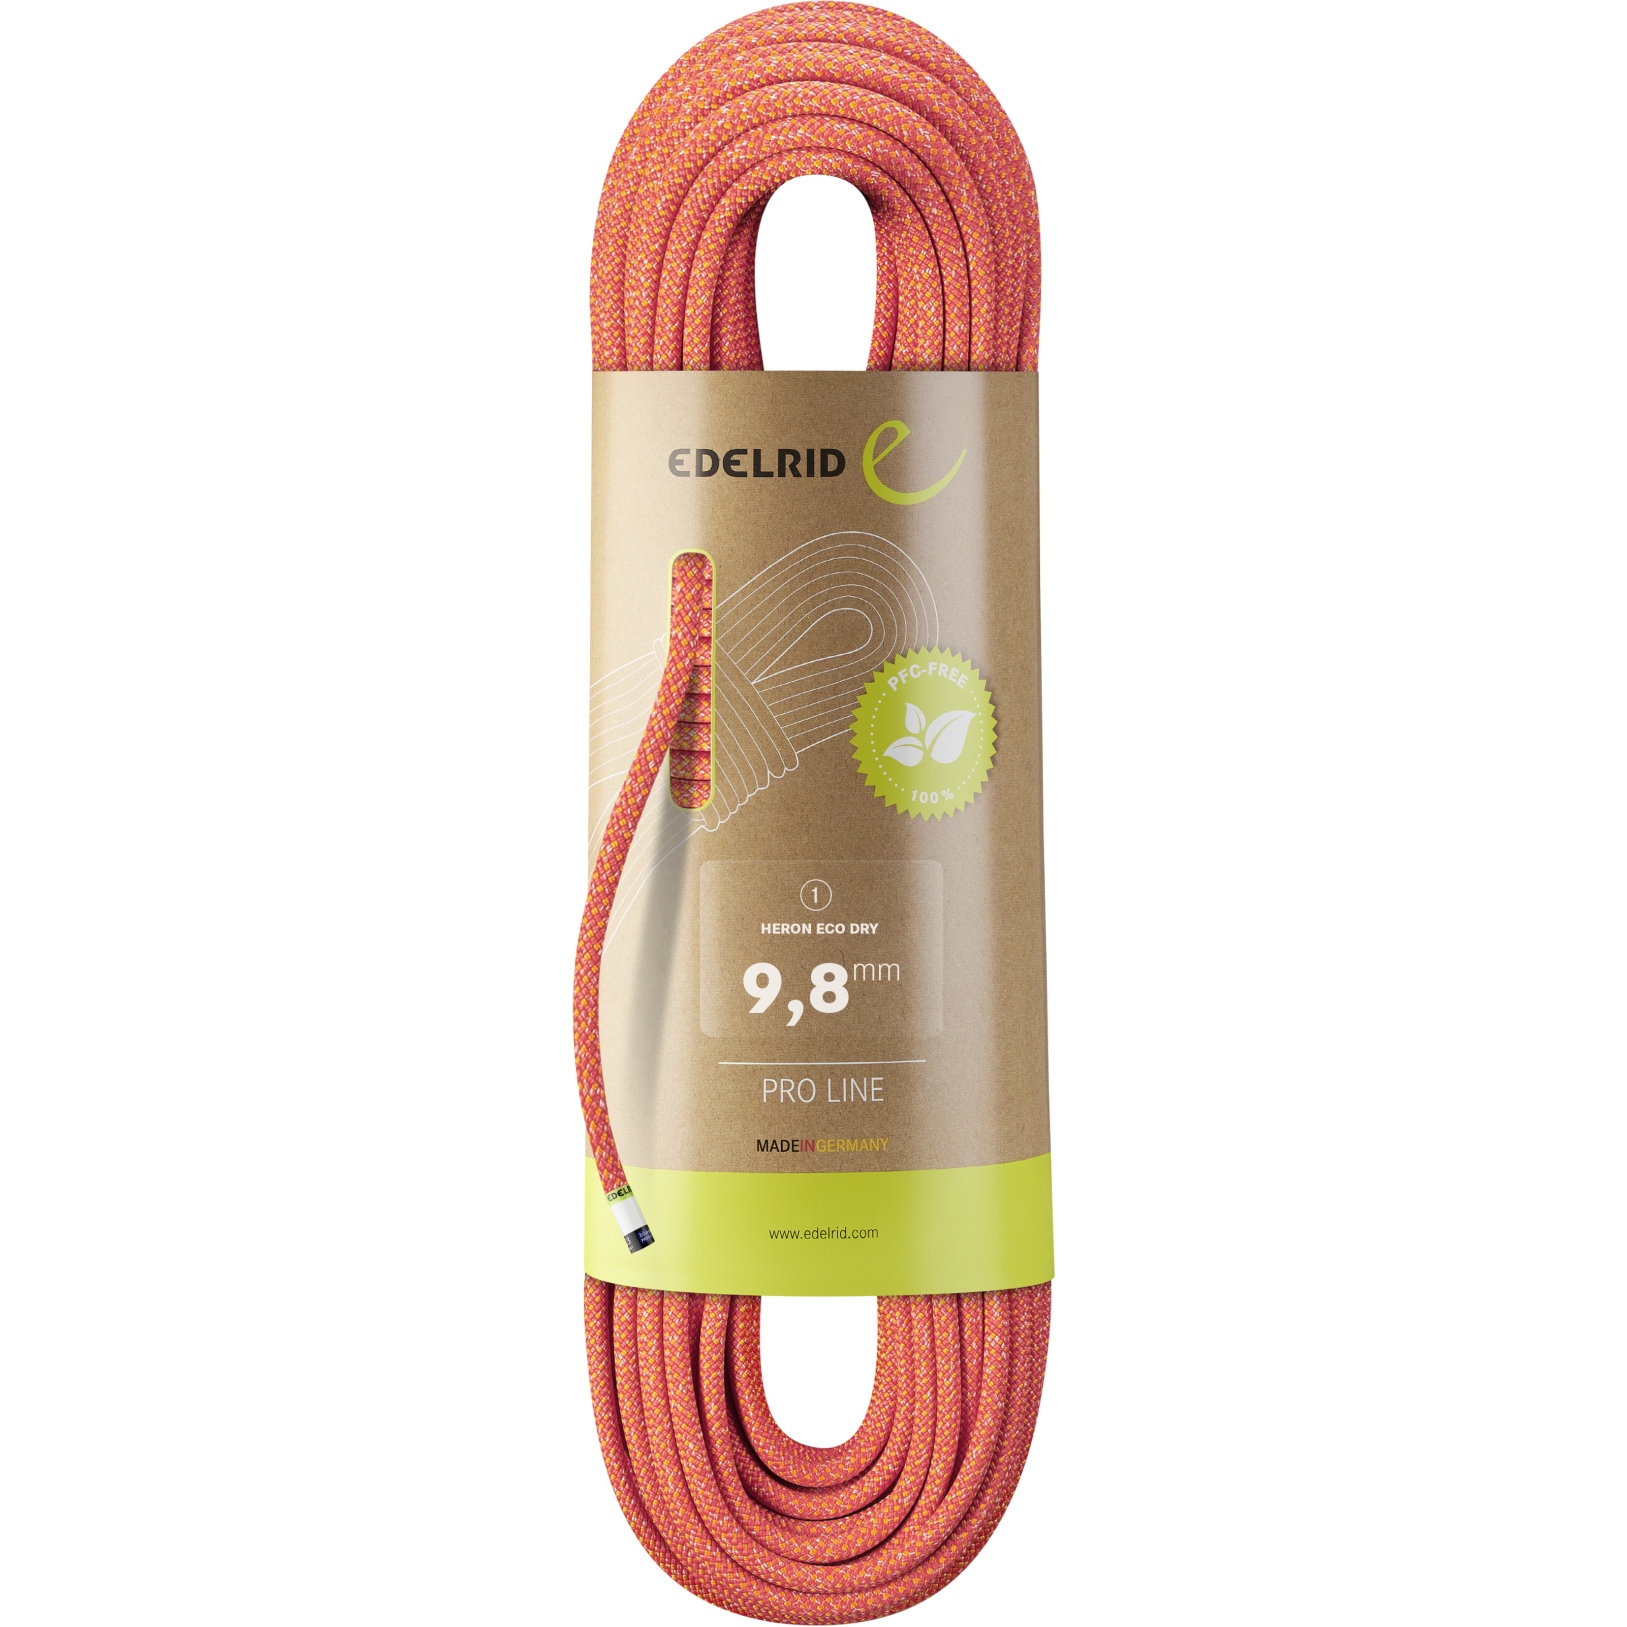 Picture of Edelrid Heron Eco Dry 9,8mm Rope - 60m - fire